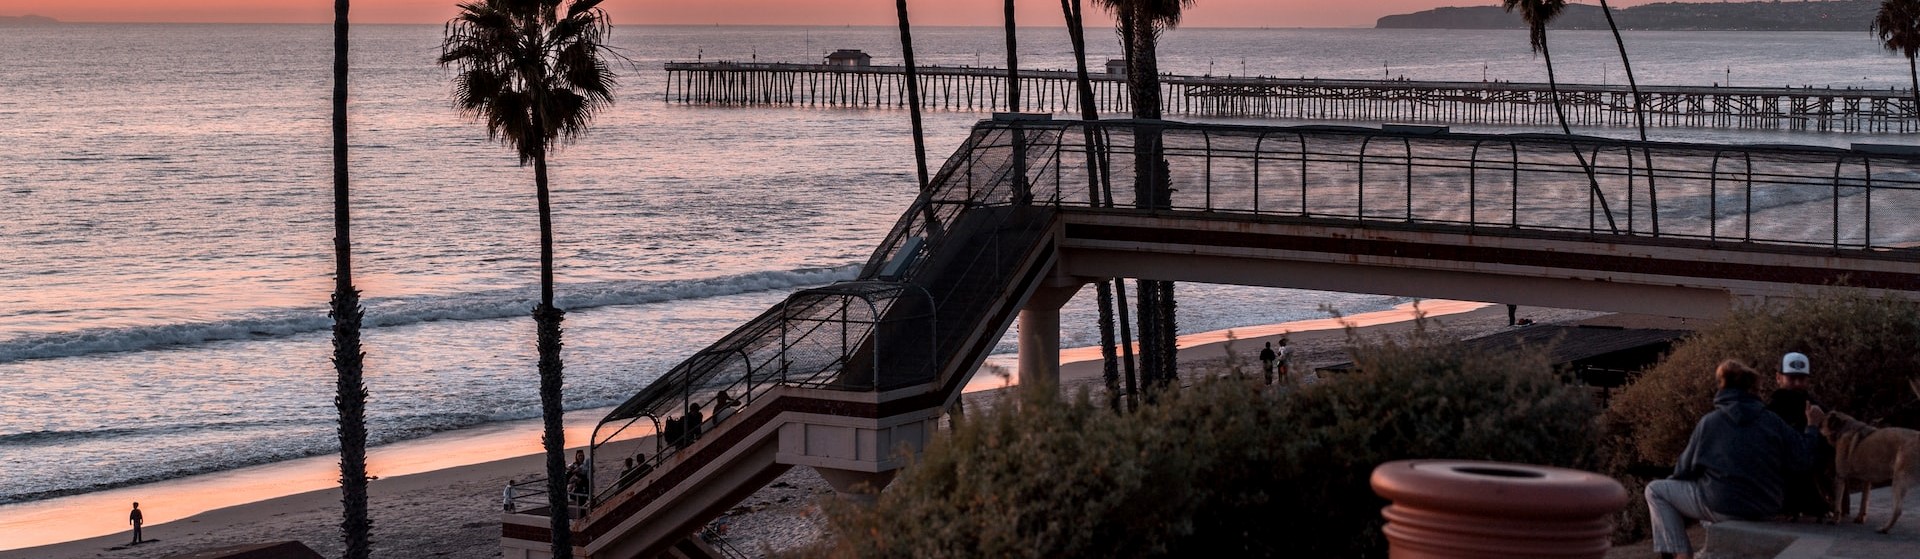 Sunset view in san clemente | Breast Cancer Car Donations